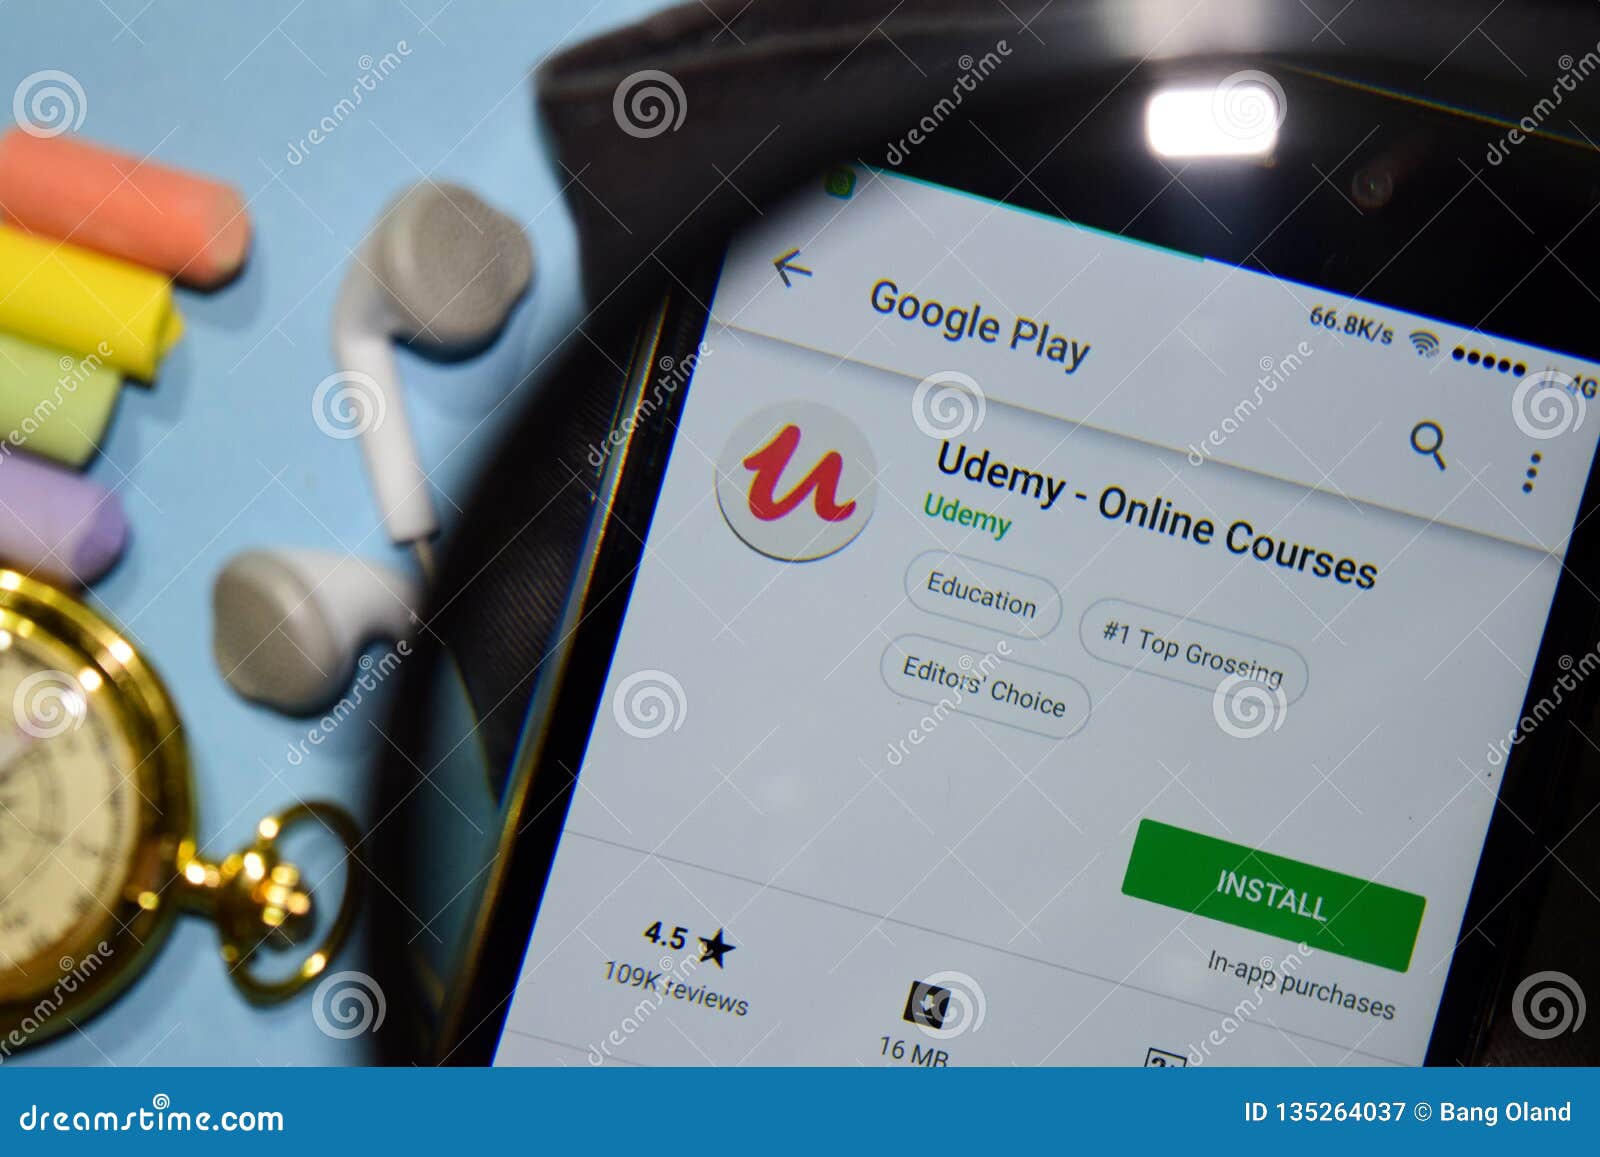 Udemy - Online Courses Dev App With Magnifying On ...